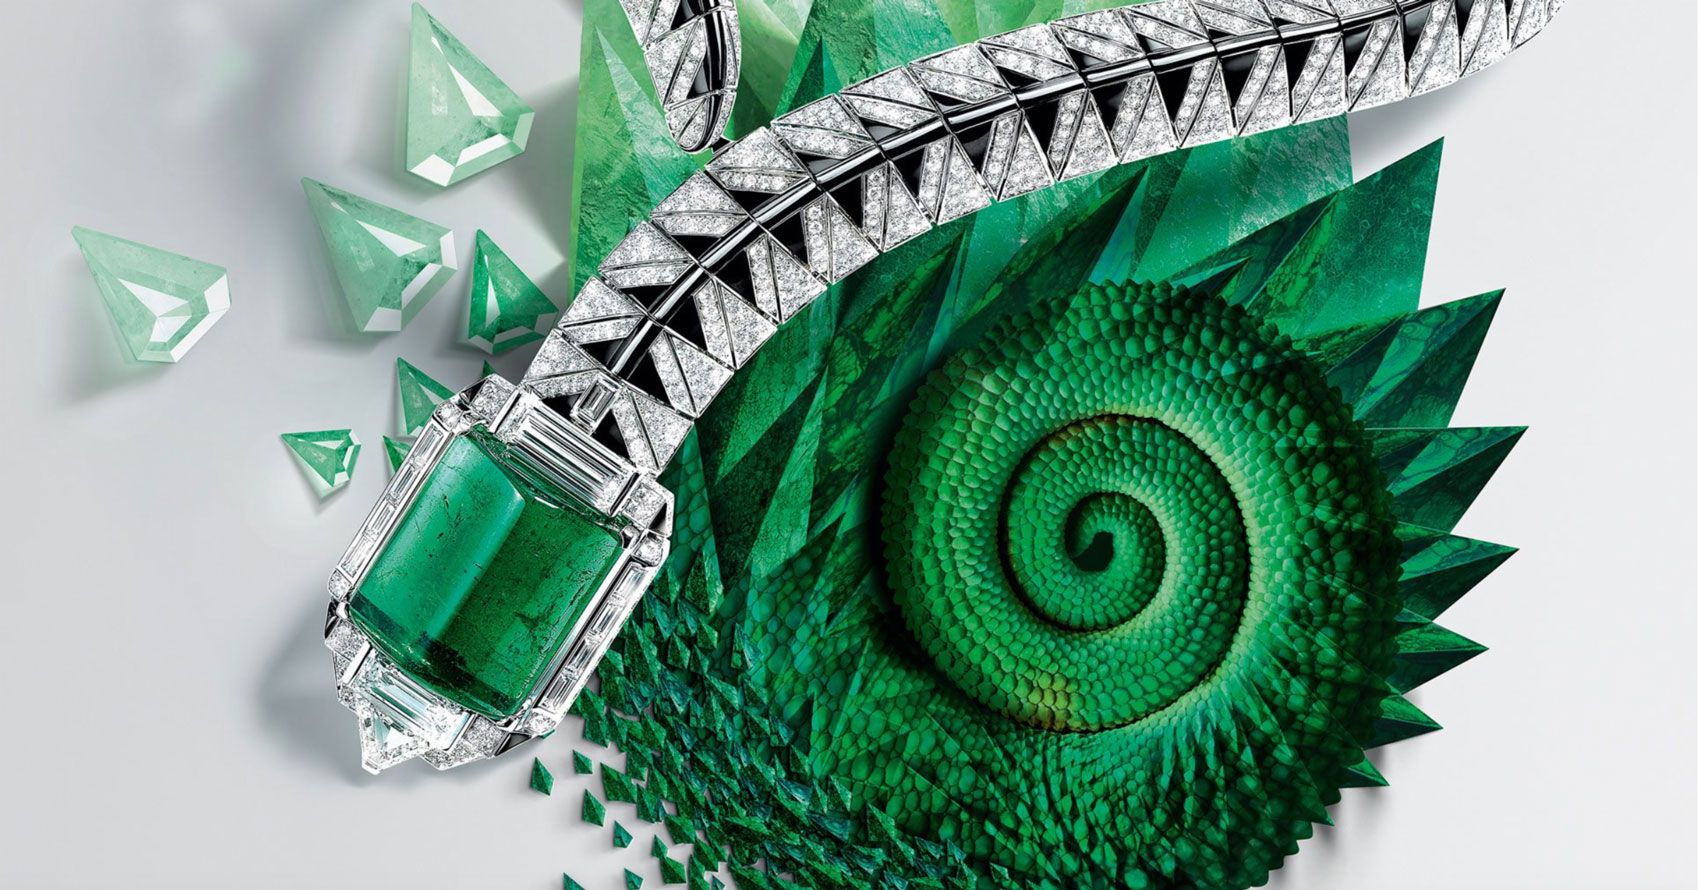 The high jewelry of January 2020